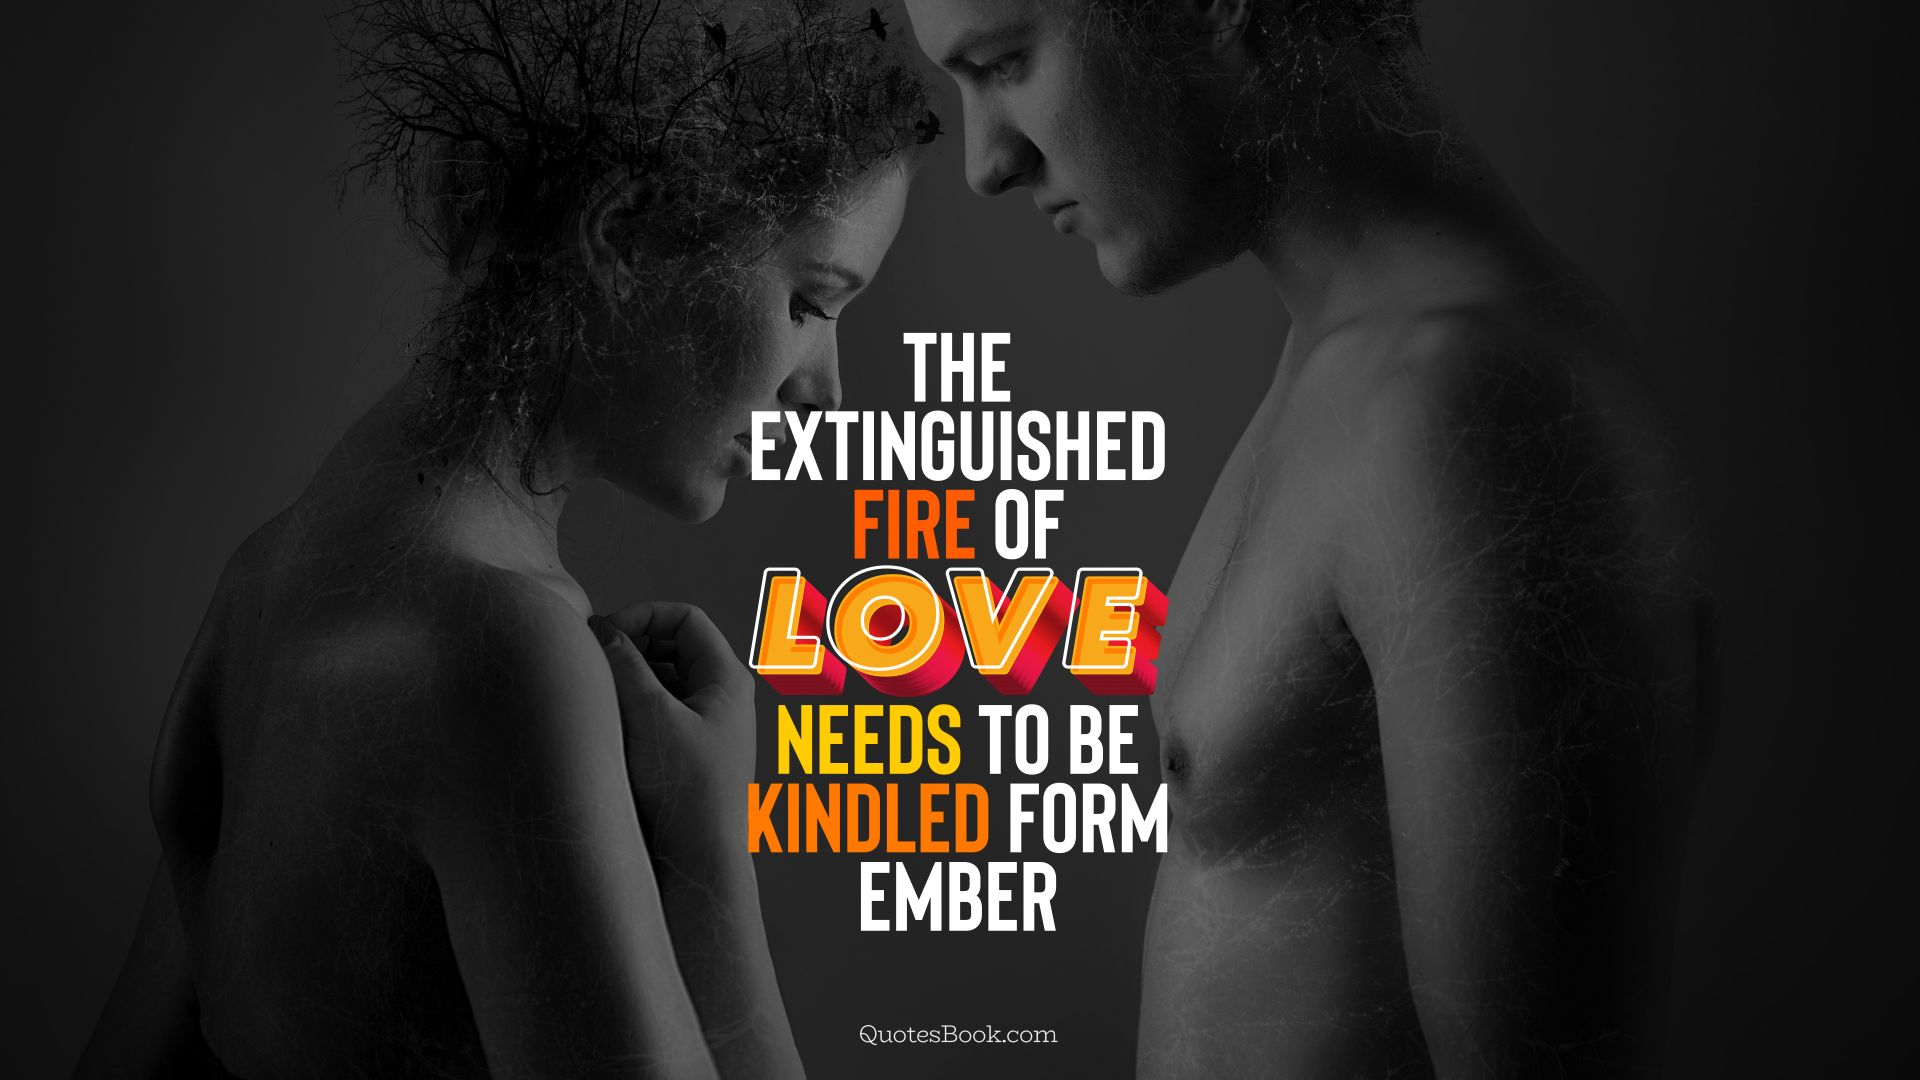 The extinguished fire of love needs to be kindled form ember. - Quote by QuotesBook